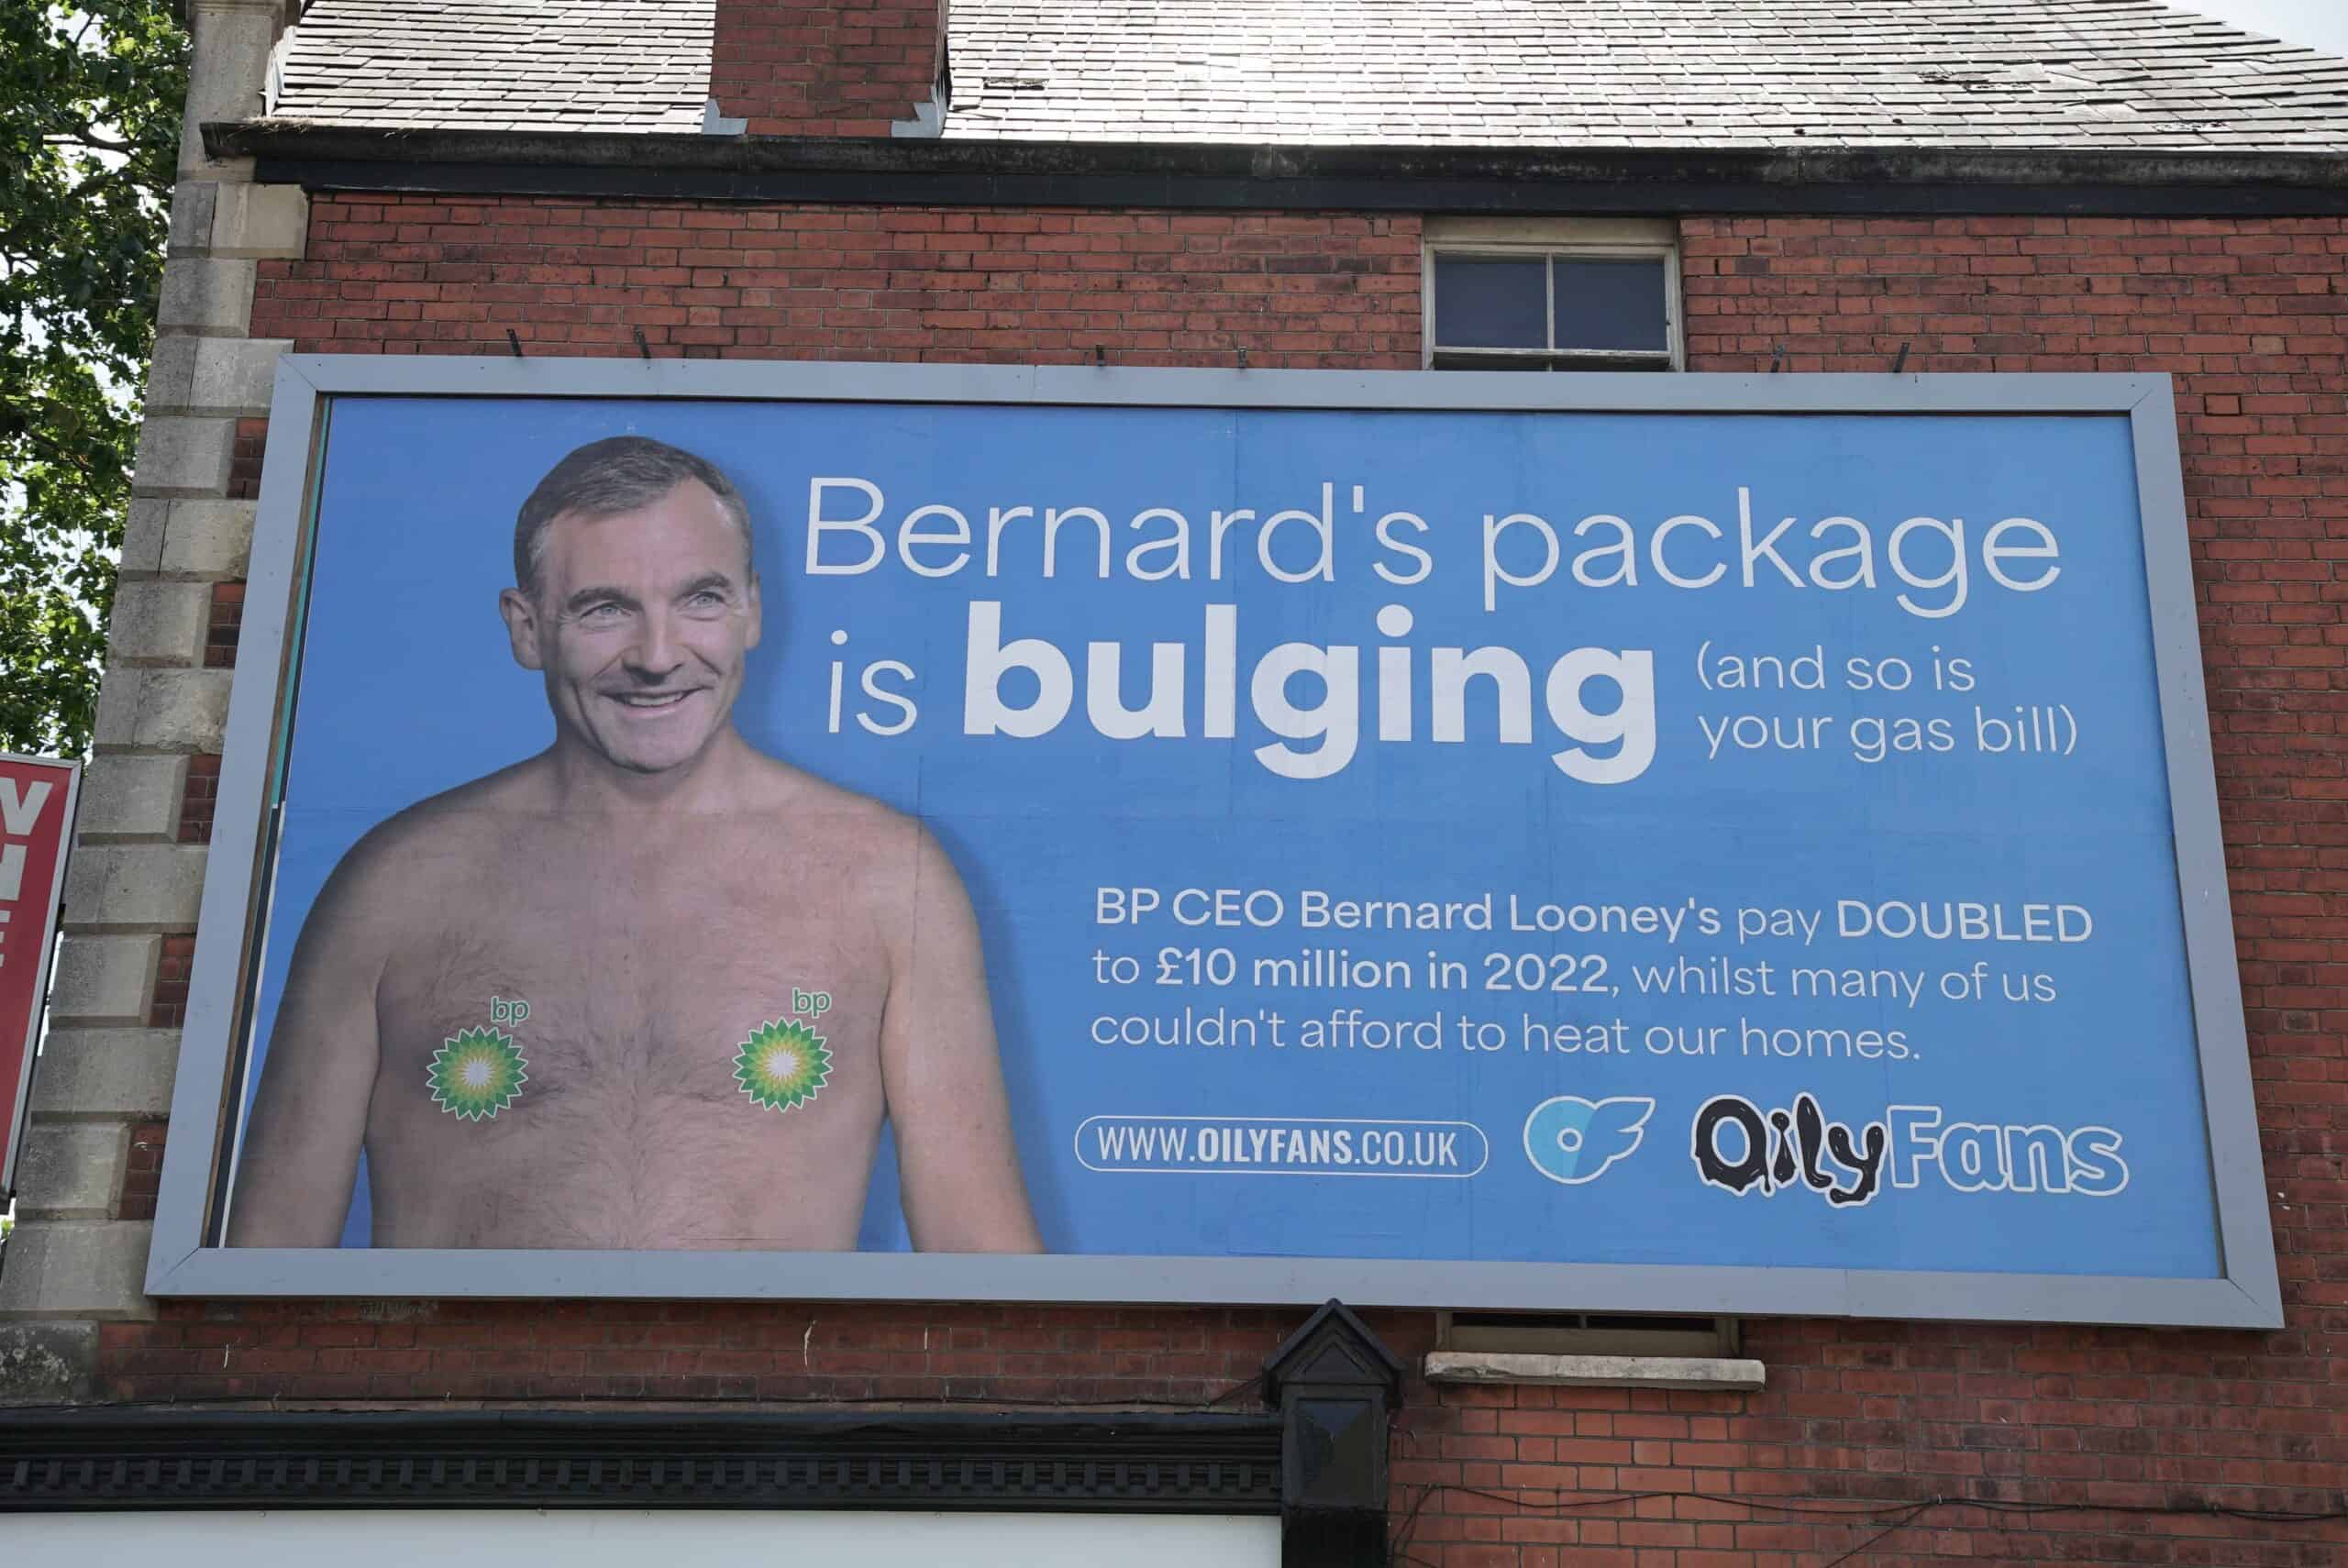 ‘OilyFans’ billboards show BP chief executive topless after earning £10 million